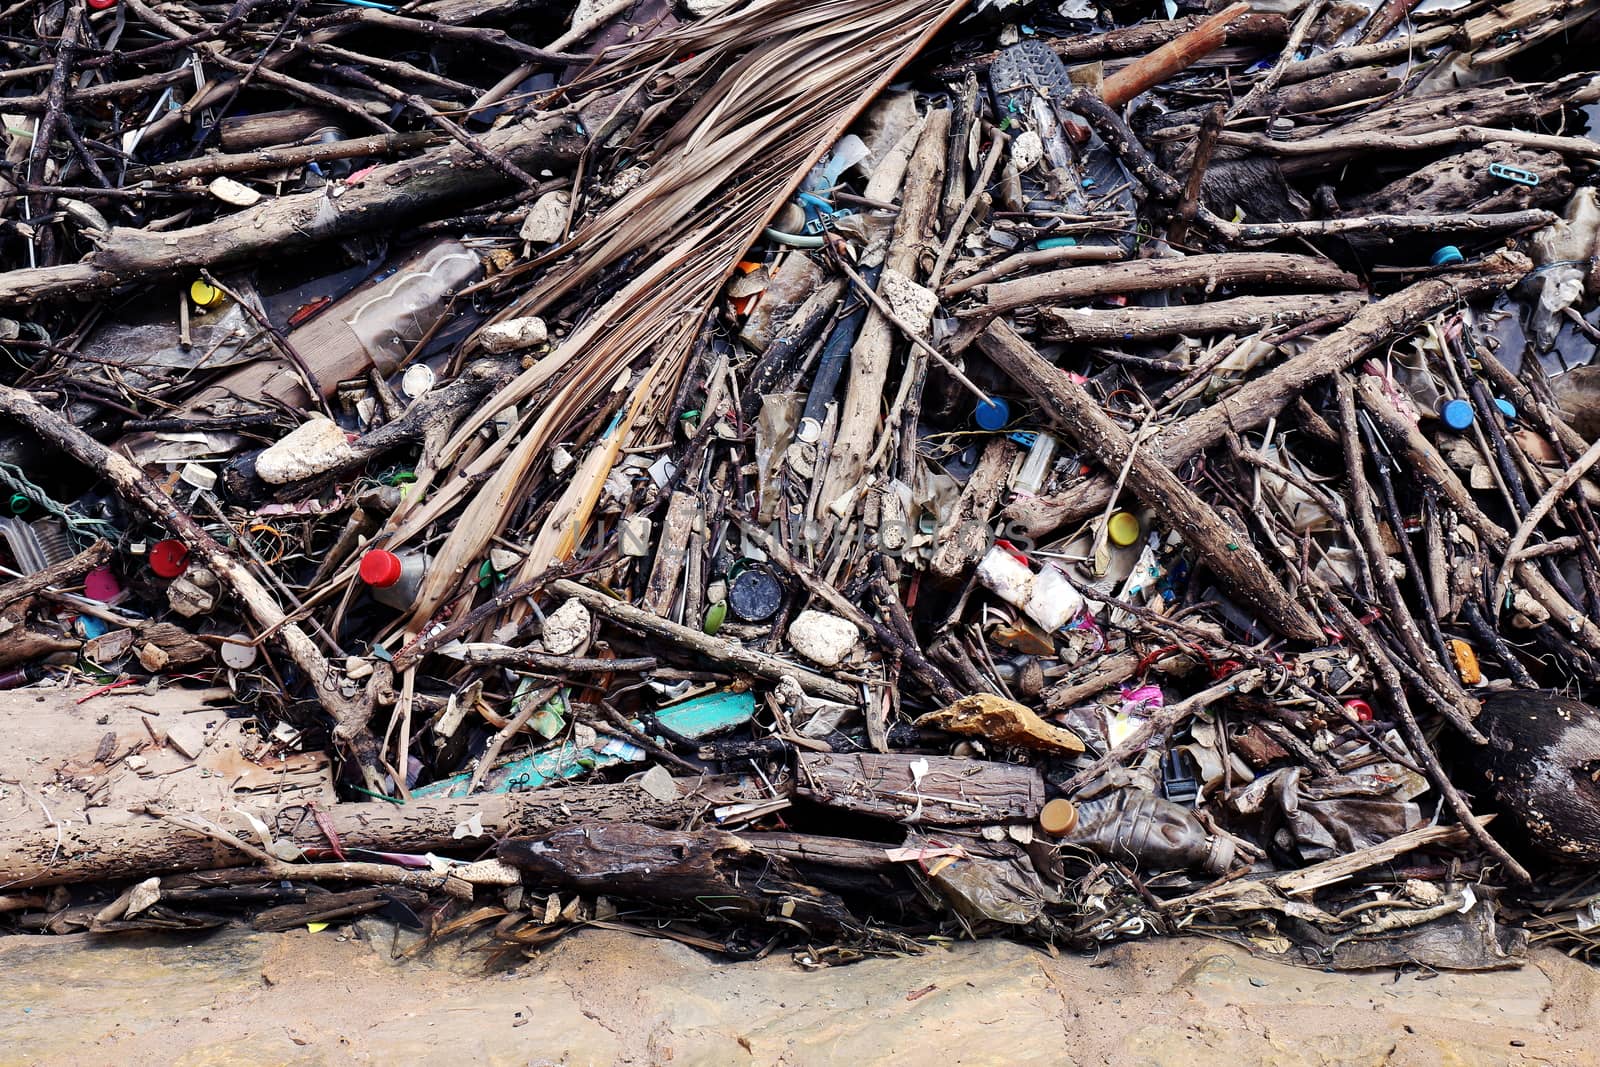 Garbage pile deposit Branches wood, Pile of wood and plastic bottles waste and debris floating on water surface at river water dirty, Problem of trash pollution and environmental on the beach or river